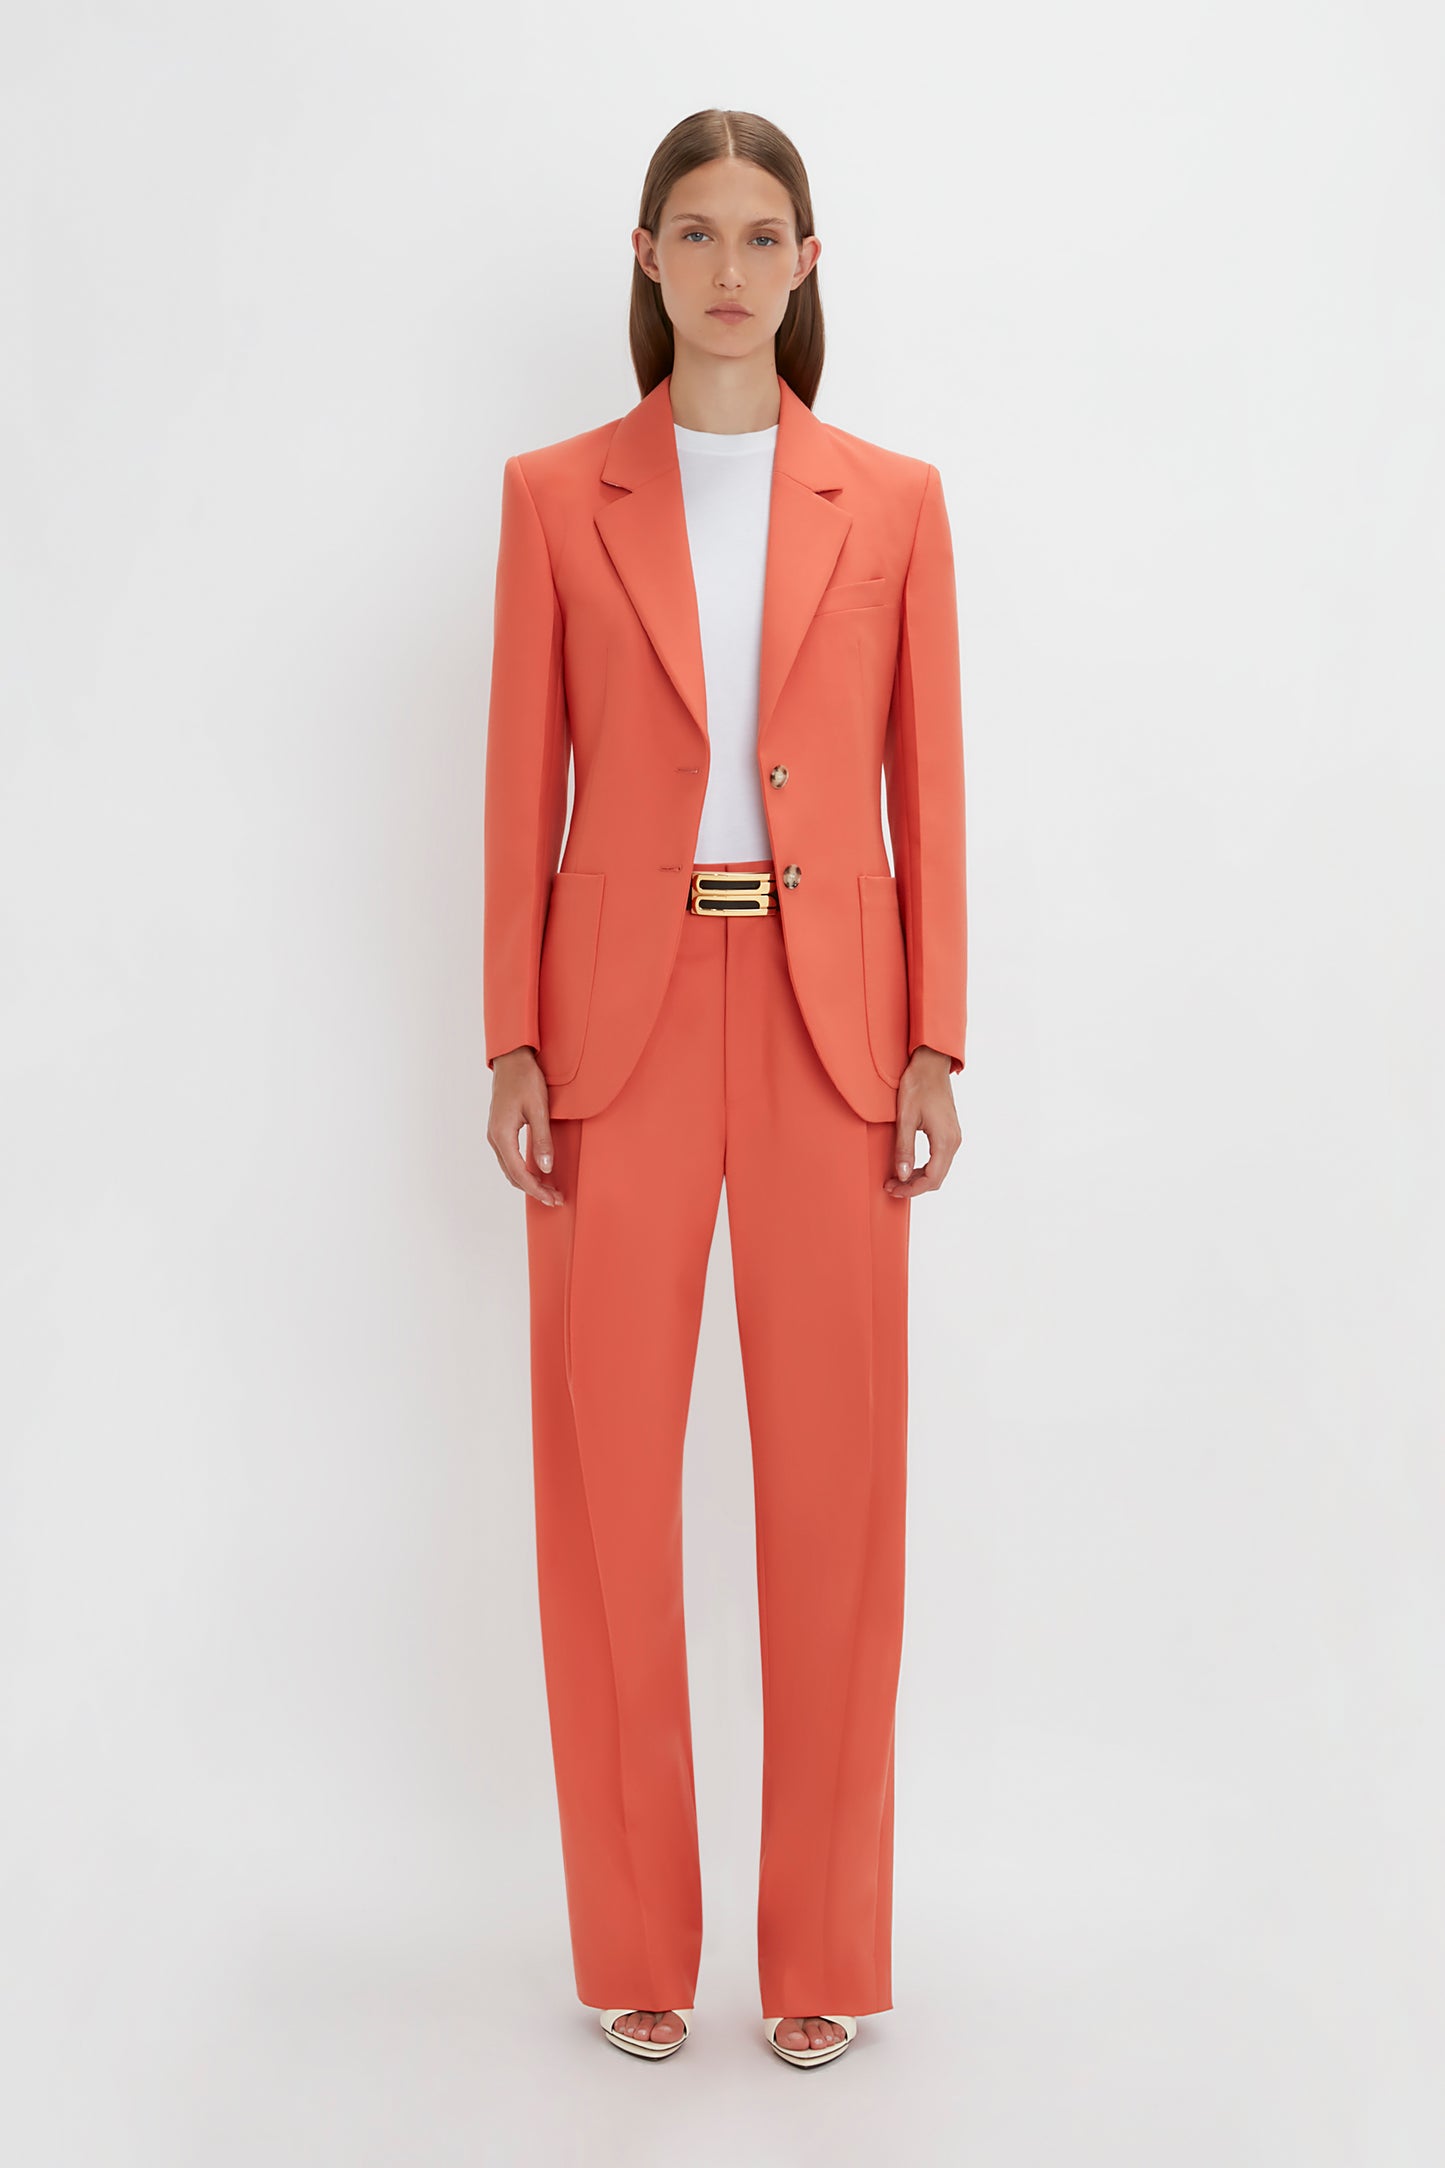 A woman in a bright Patch Pocket Jacket in Papaya by Victoria Beckham with a single-breasted jacket and a black belt, standing against a plain white background.